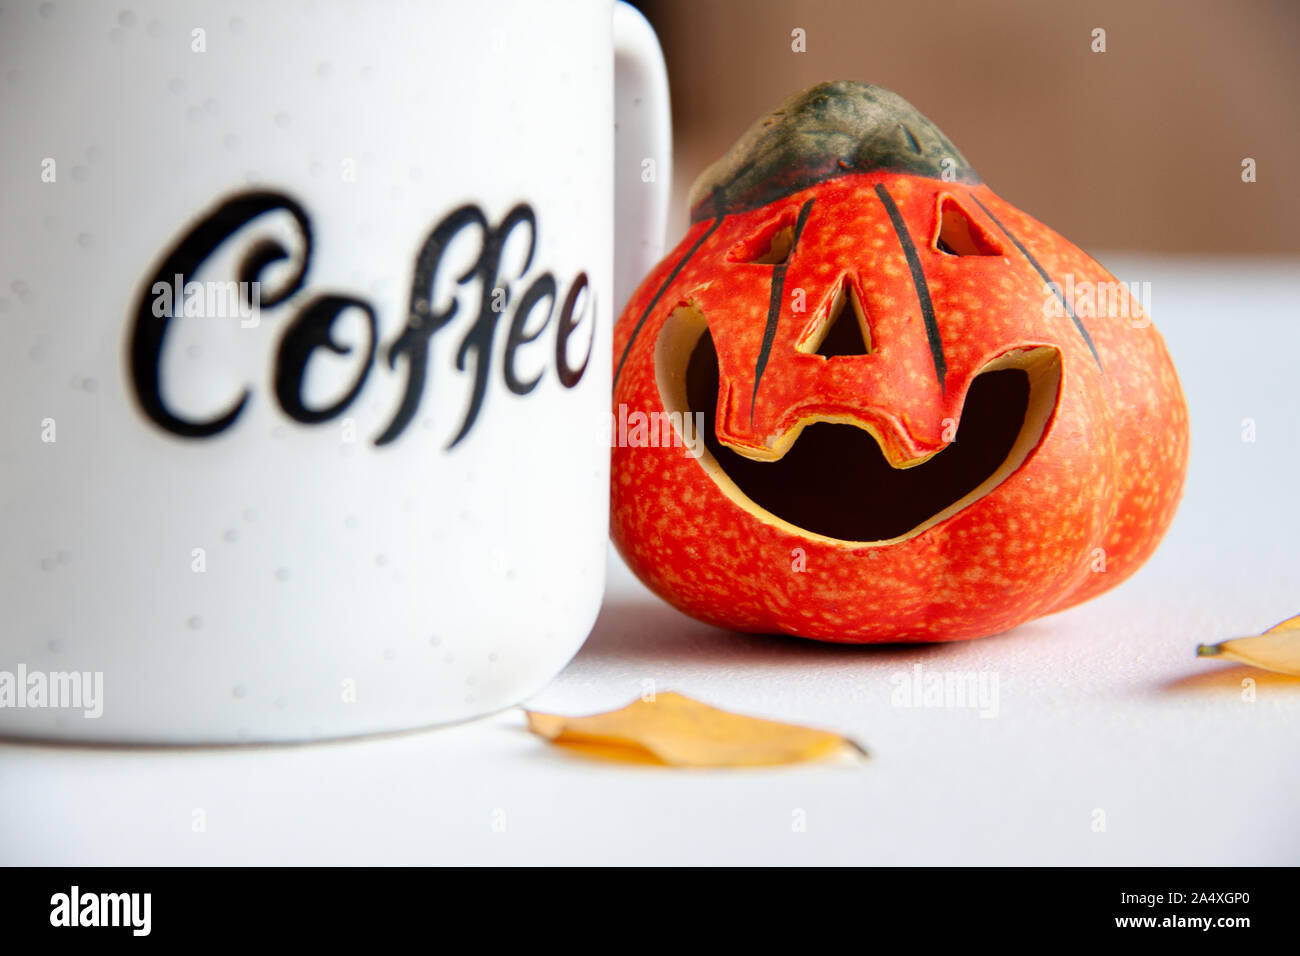 Ceramic orange small smile halloween pumpkin with autumn leaves near it and coffee cup with text 'coffee' on it. Holiday concept Stock Photo